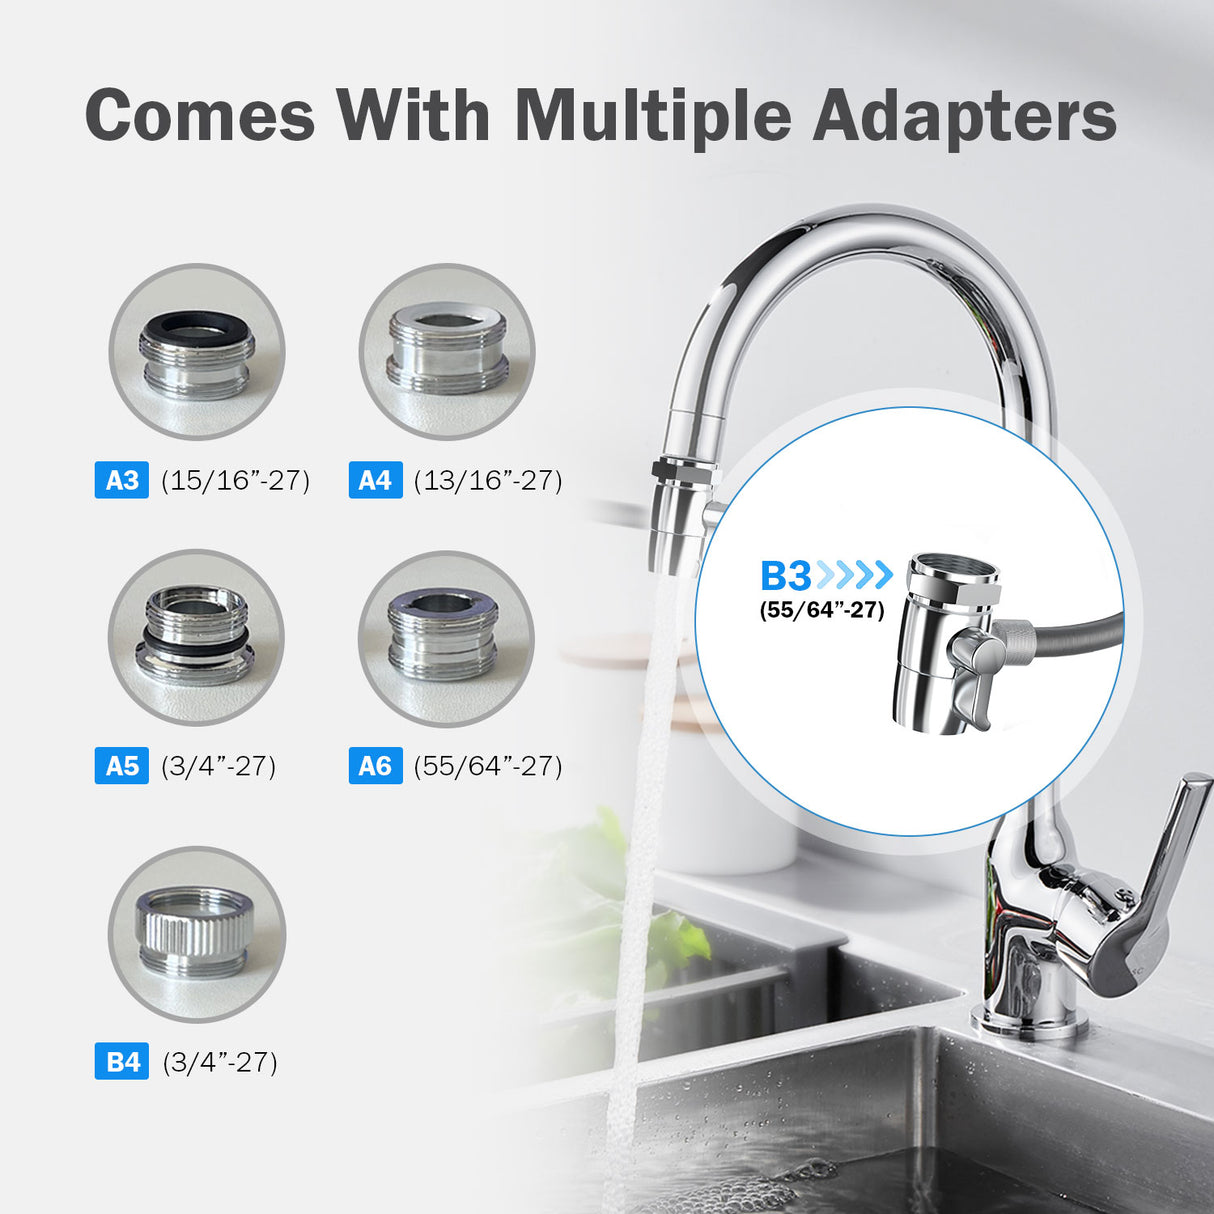 Frizzlife SS99 Countertop Water Filter System, Stainless Steel Faucet Water Filtration for 8000 Gallons, 0.5 Micron NSF Certified Elements Reduces 99.99% Lead, Chlorine, Heavy Metals, Bad Taste & Odor